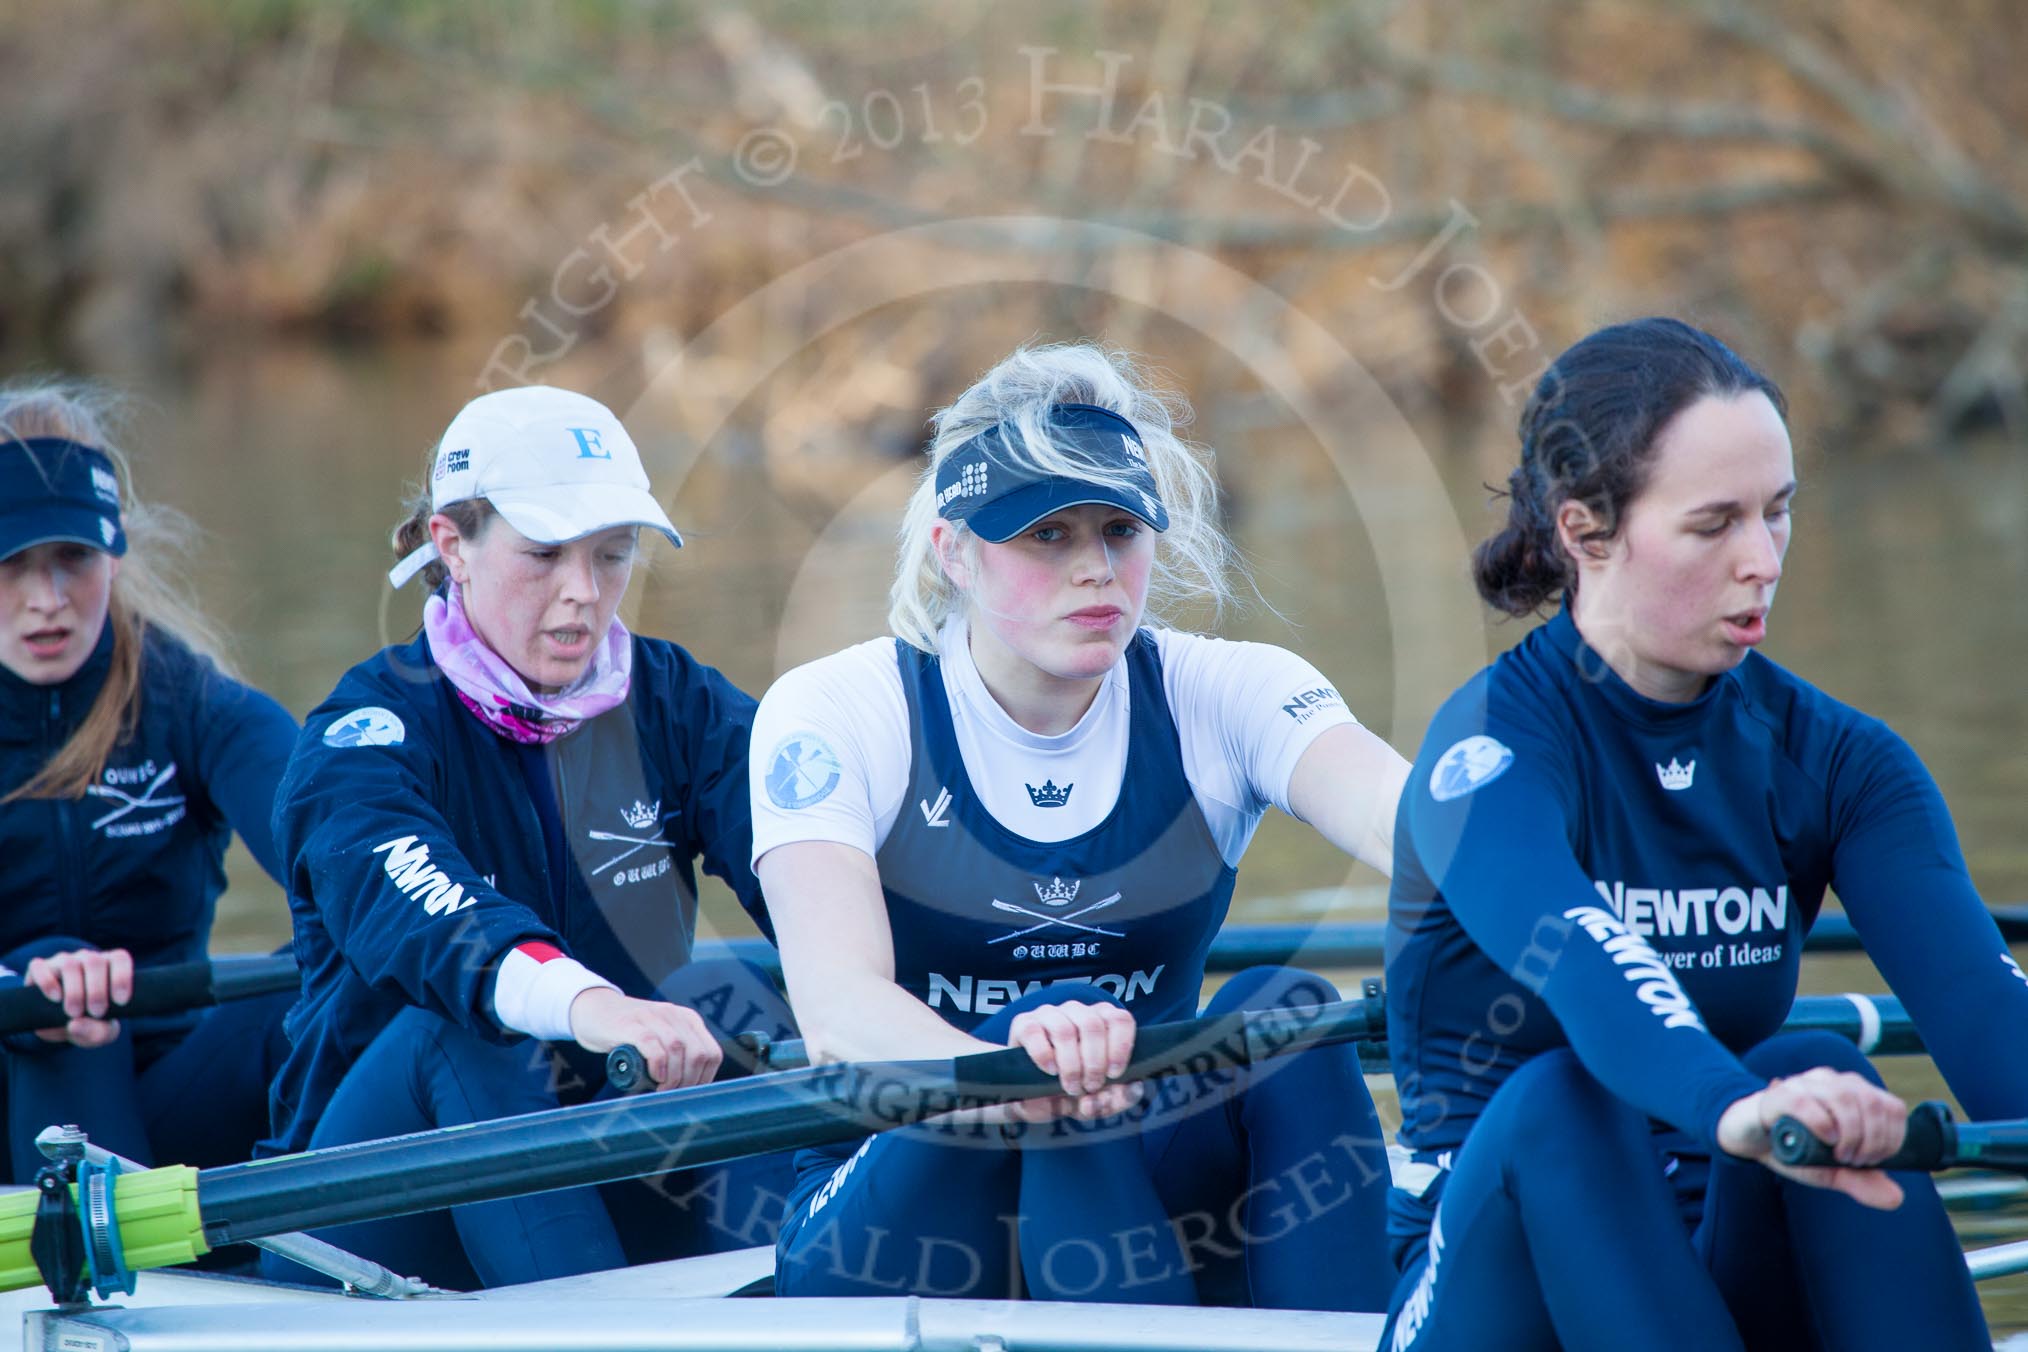 The Boat Race season 2013 - OUWBC training: OUWBC Blue Boat 3 seat Mary Foord-Weston, 4 seat Jo Lee, Amy Varney, and Harriet Keane..
River Thames,
Wallingford,
Oxfordshire,
United Kingdom,
on 13 March 2013 at 17:14, image #114